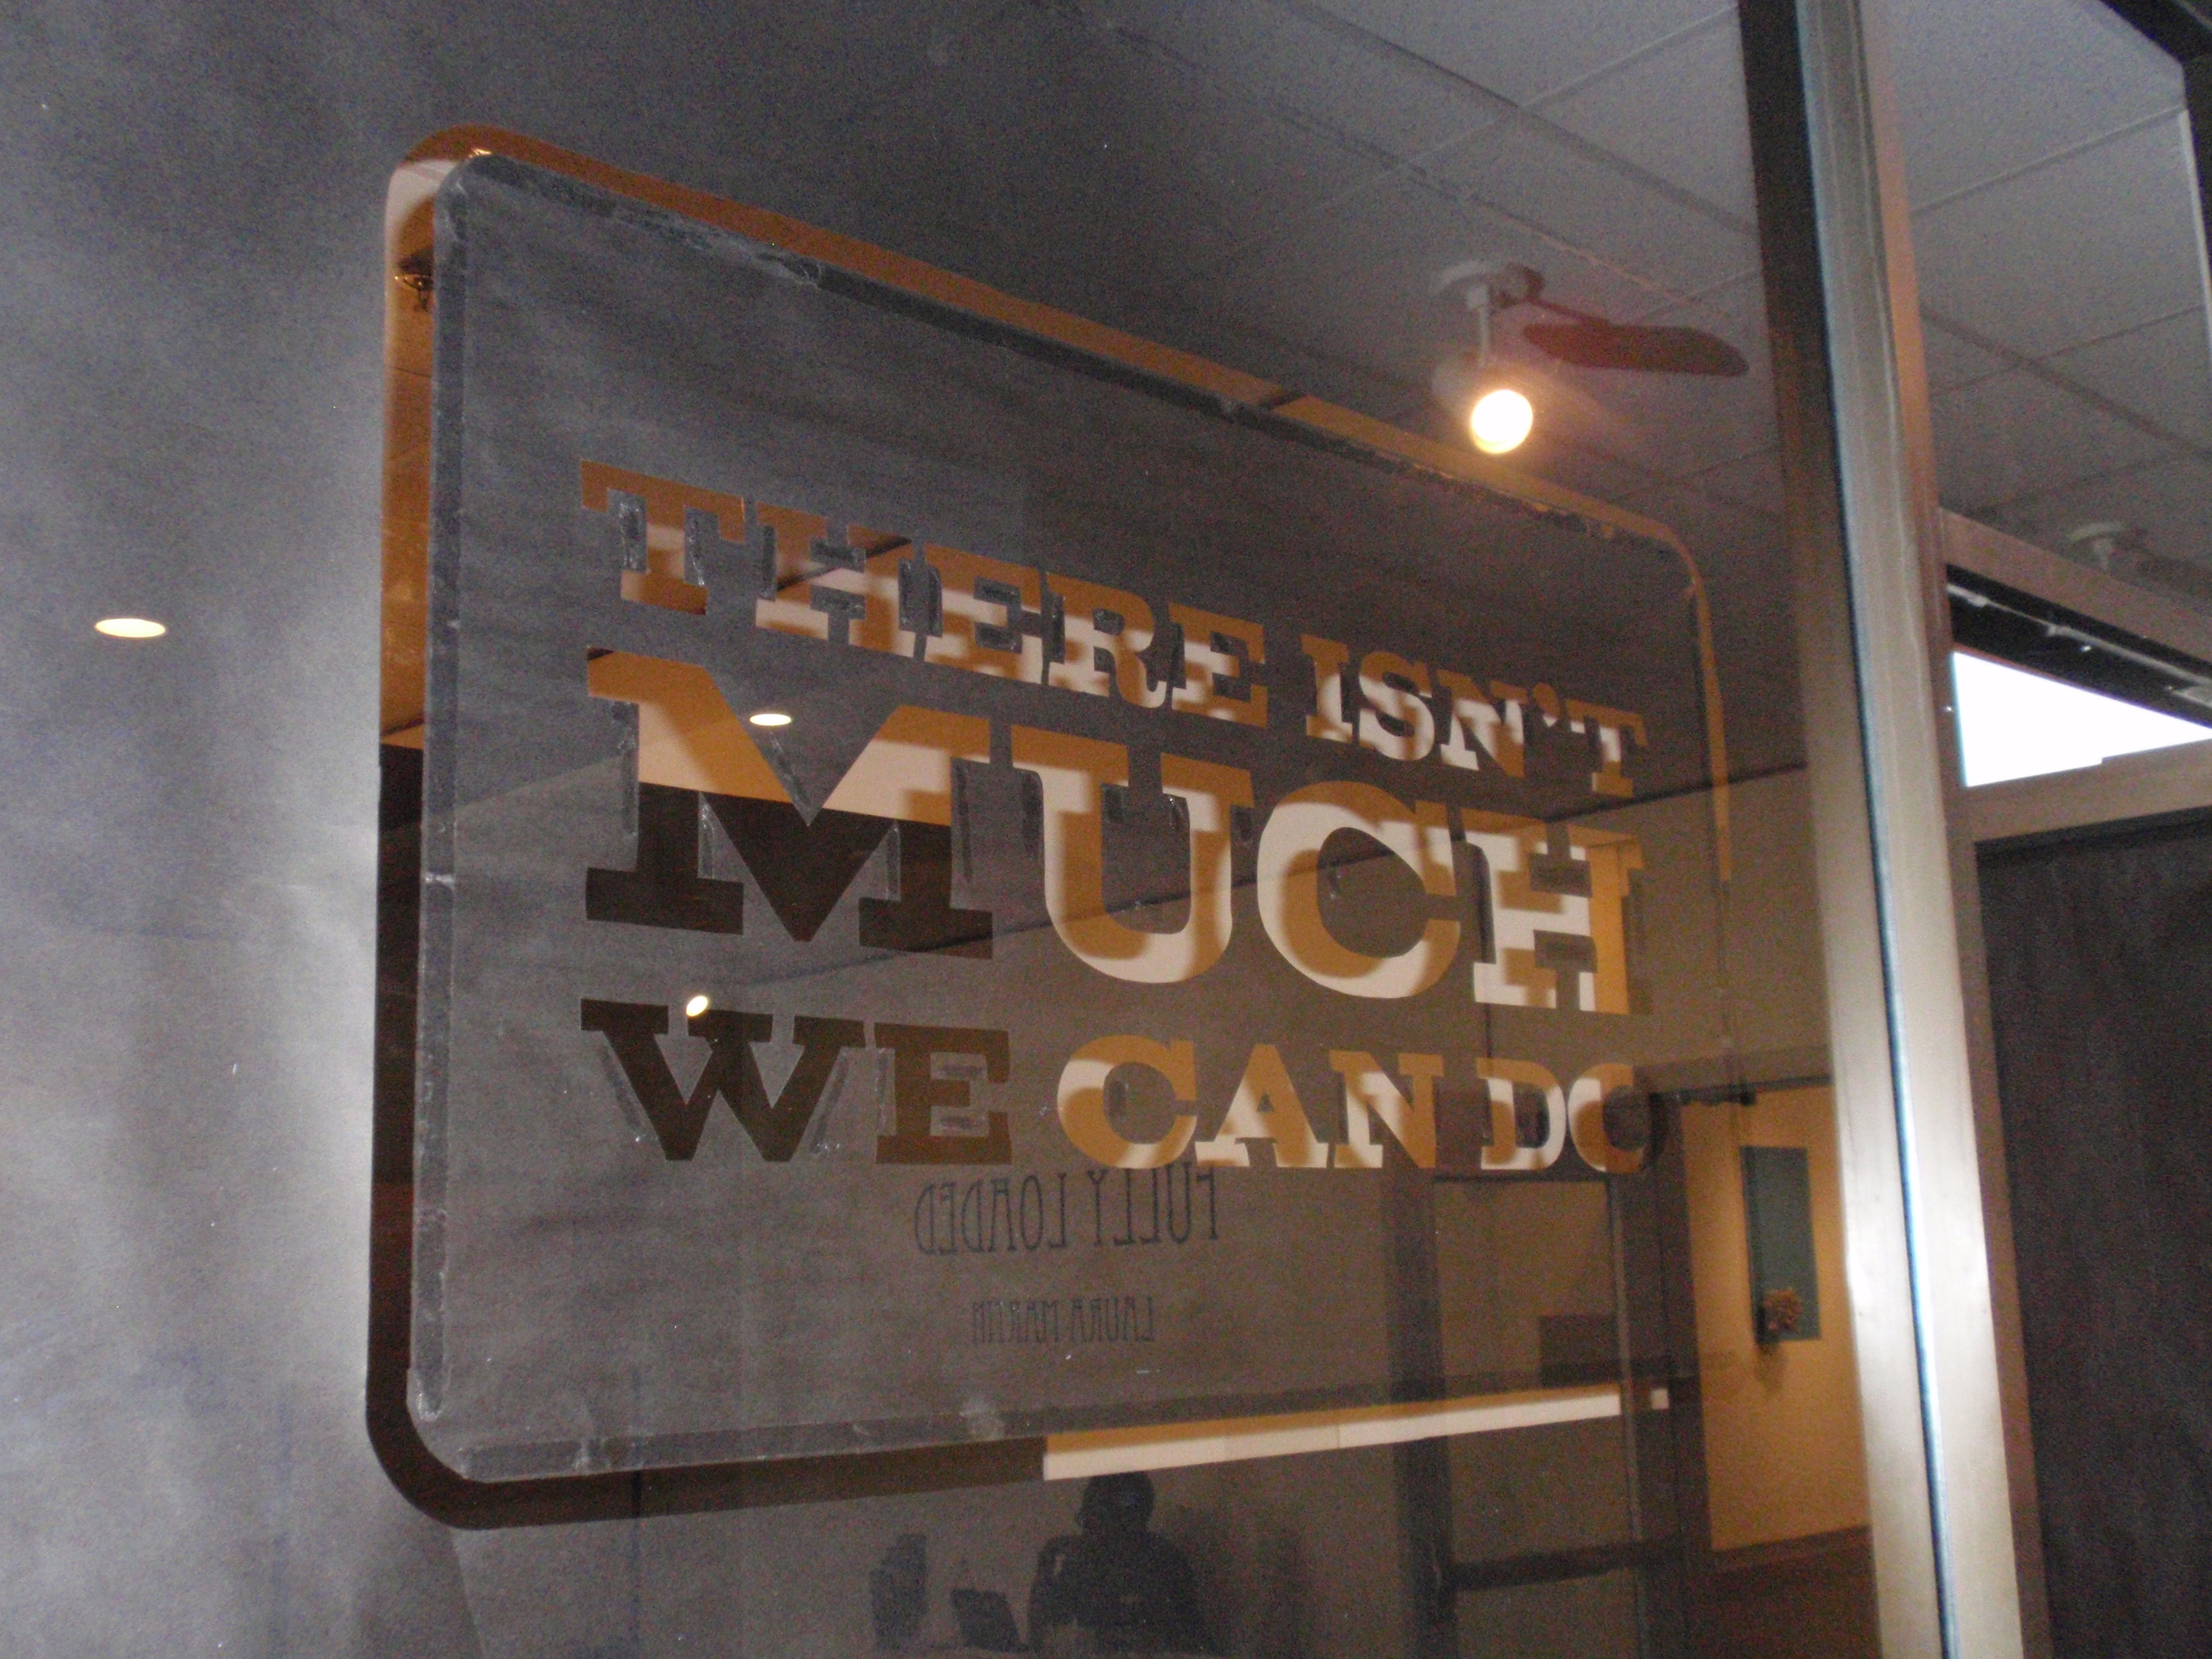 Gallery Exhibition, There isn’t much we can do, review